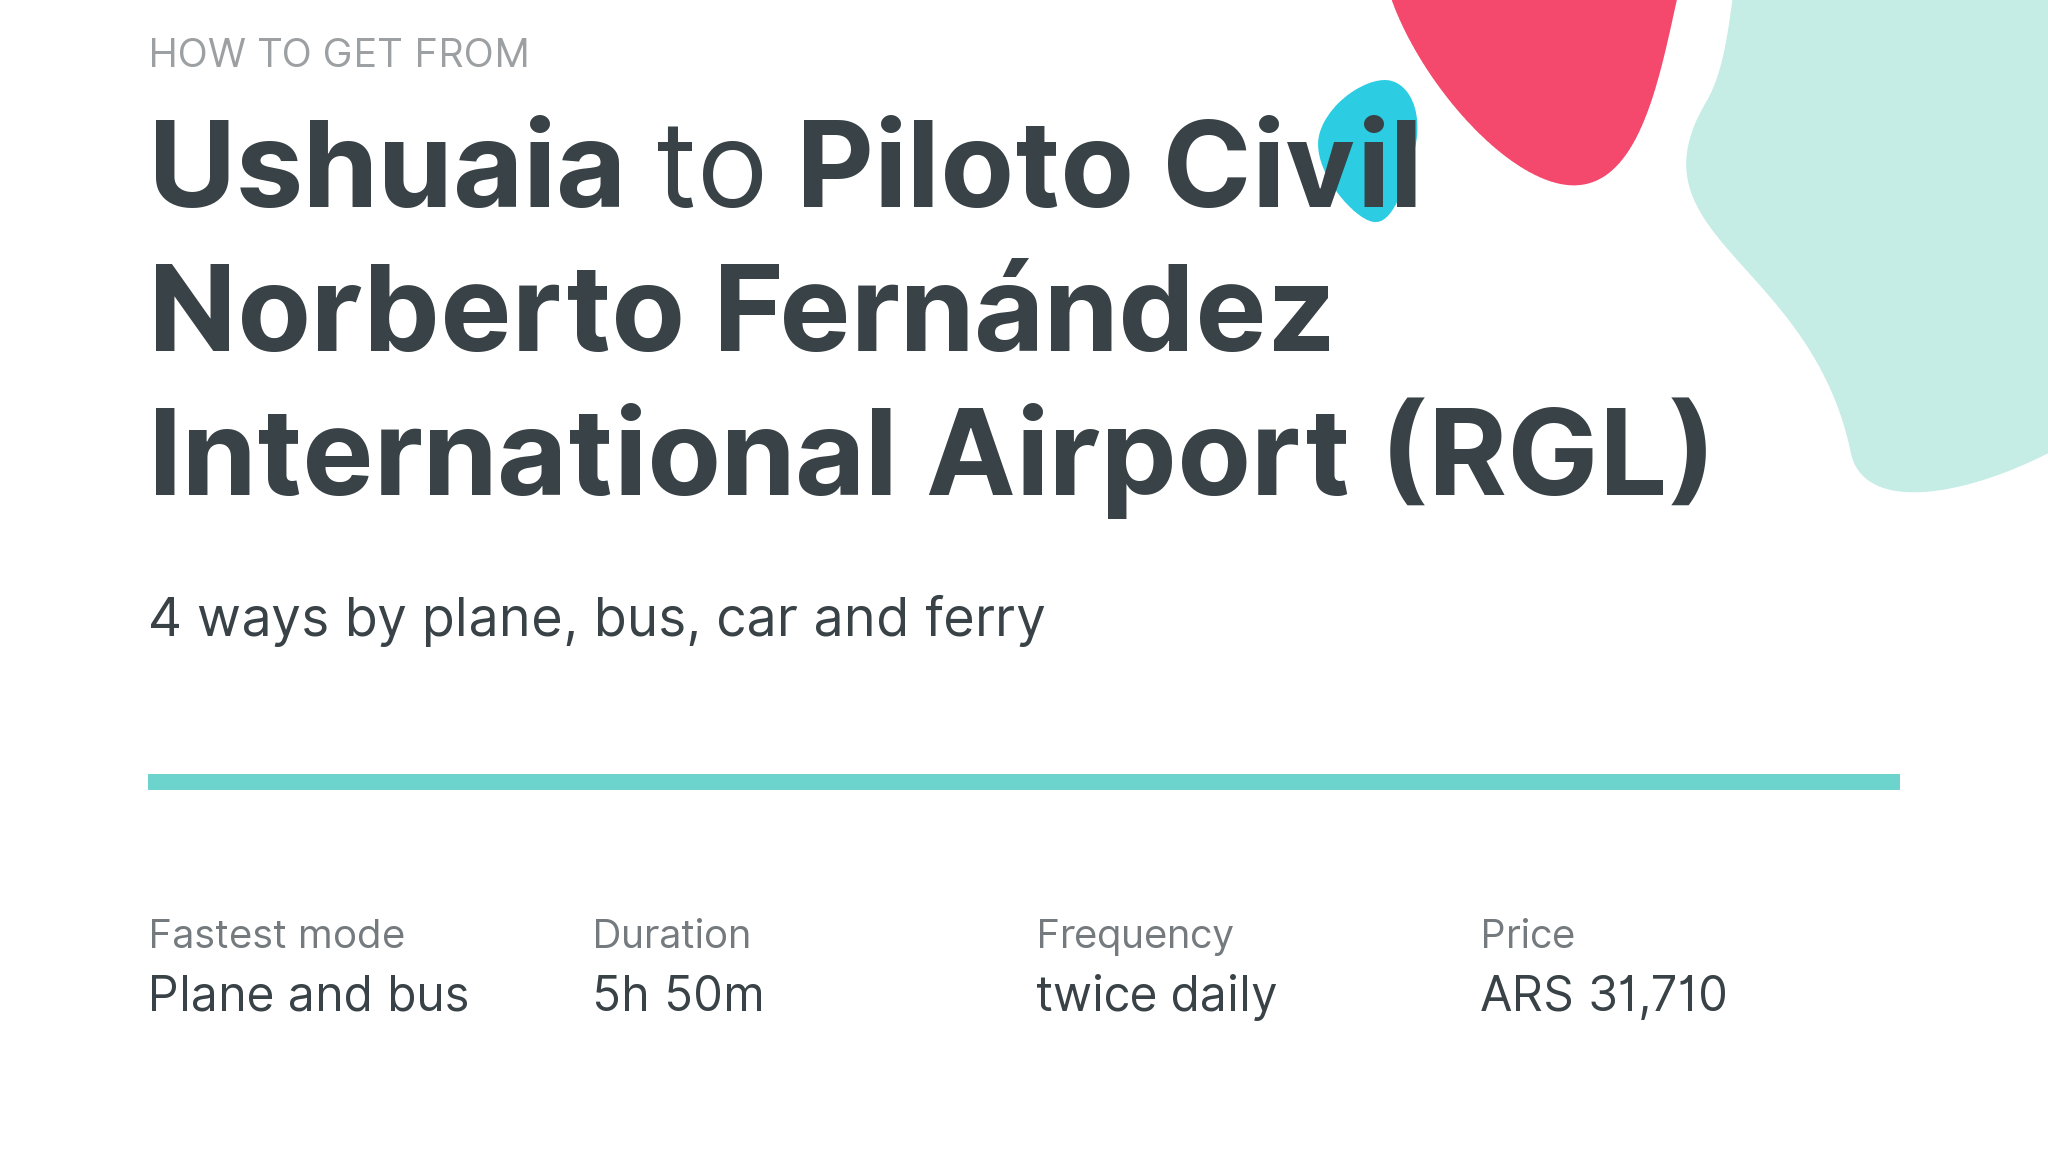 How do I get from Ushuaia to Piloto Civil Norberto Fernández International Airport (RGL)